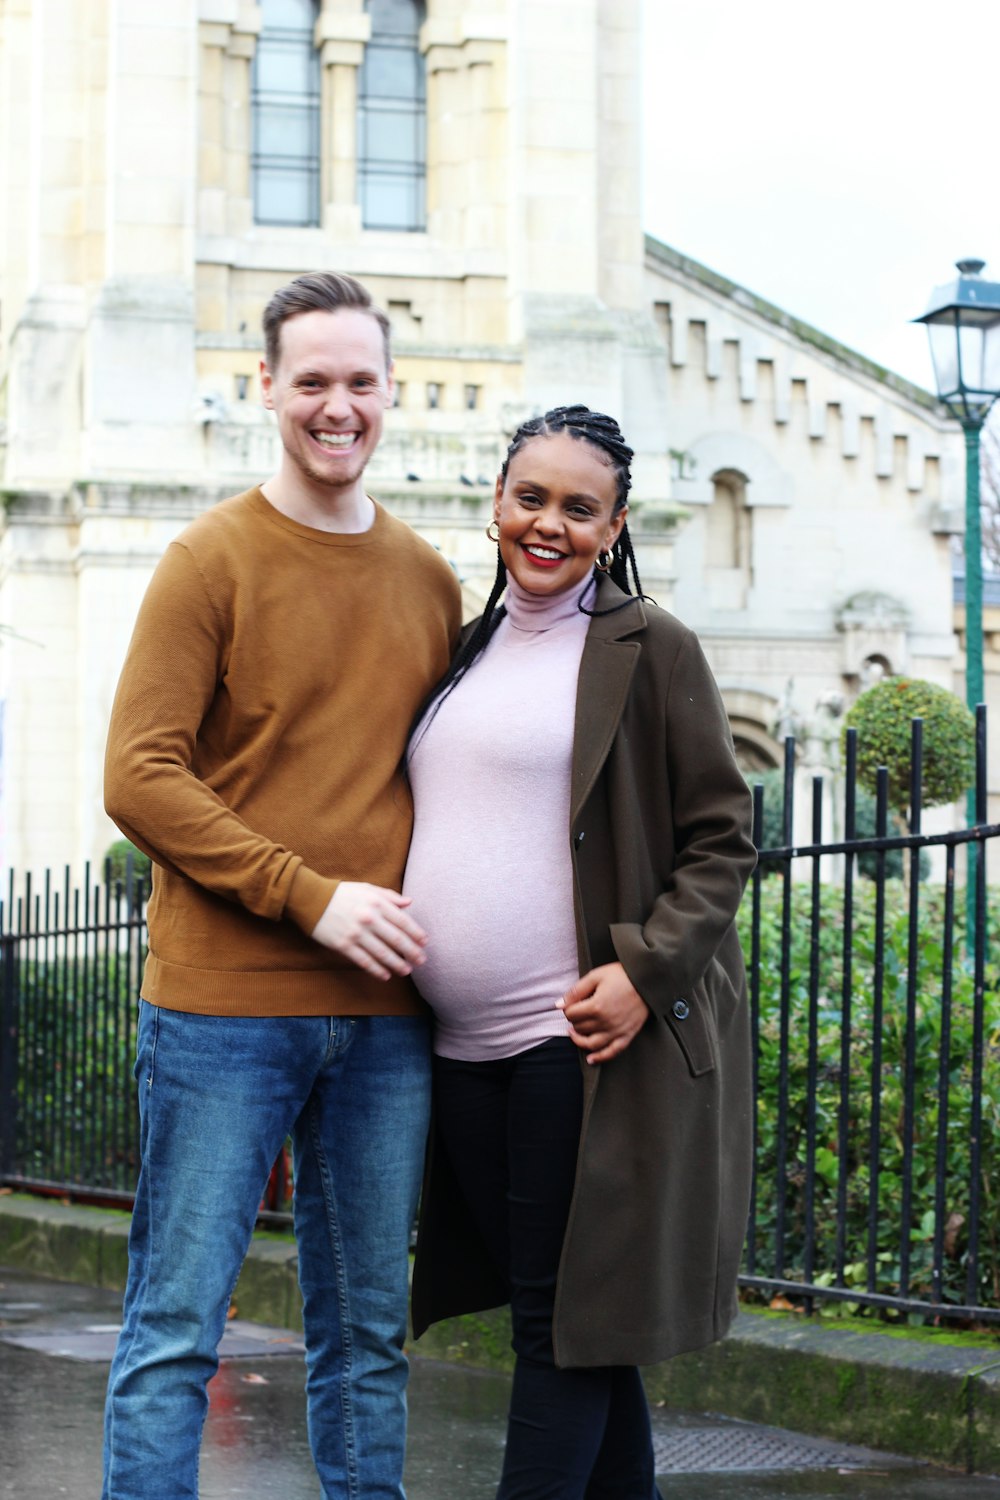 pregnant woman beside man standing on the concrete pavement